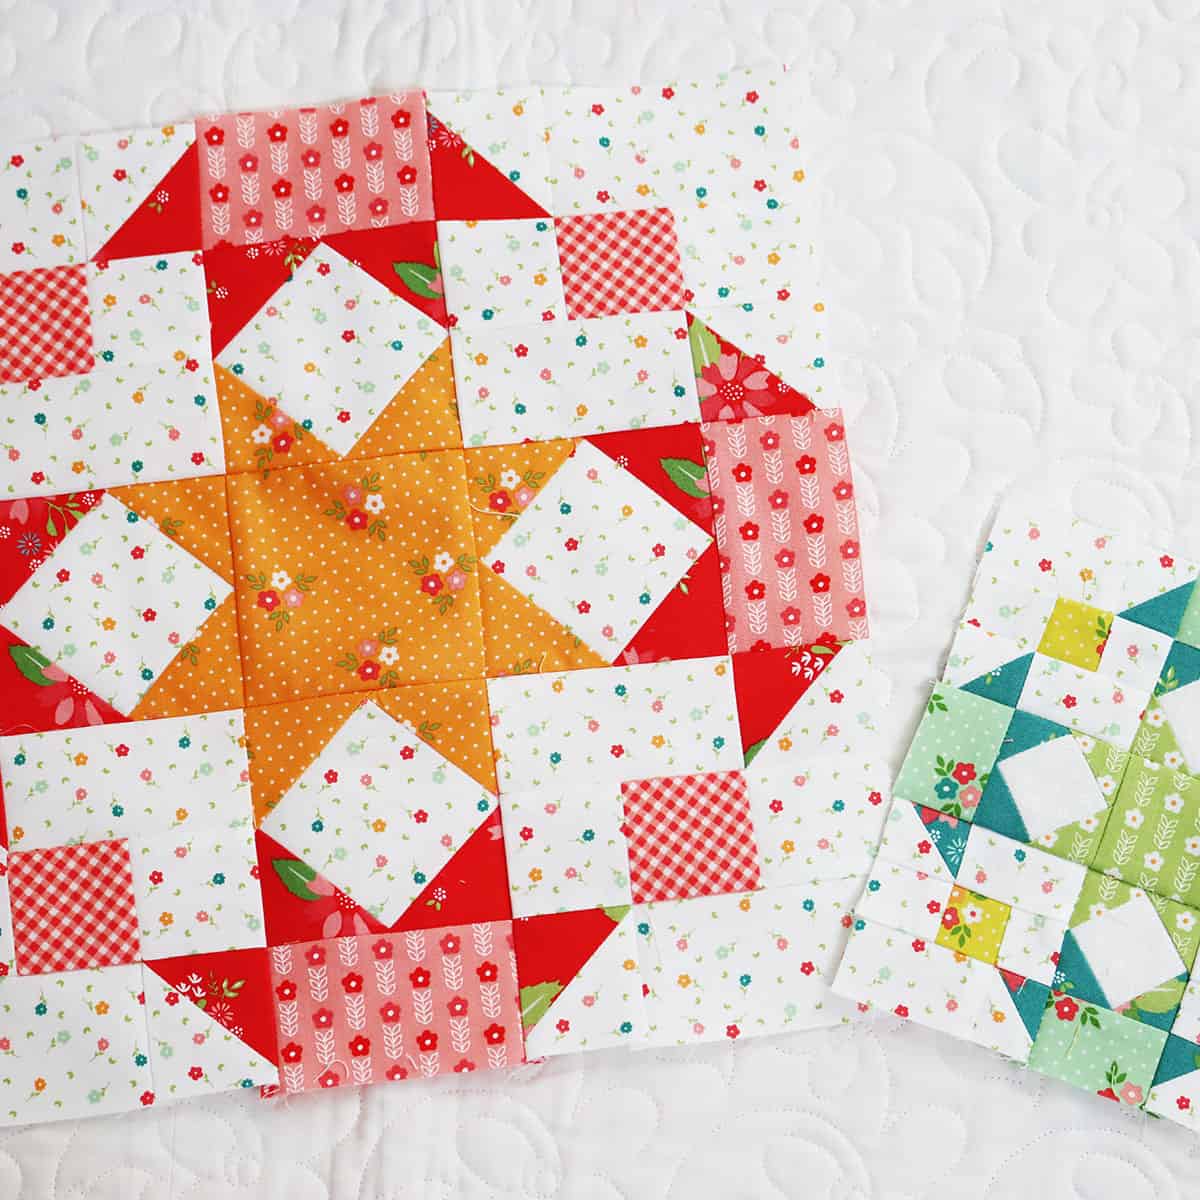 Large and small star design patchwork blocks in bright colors with a center star surrounded by four half star designs.